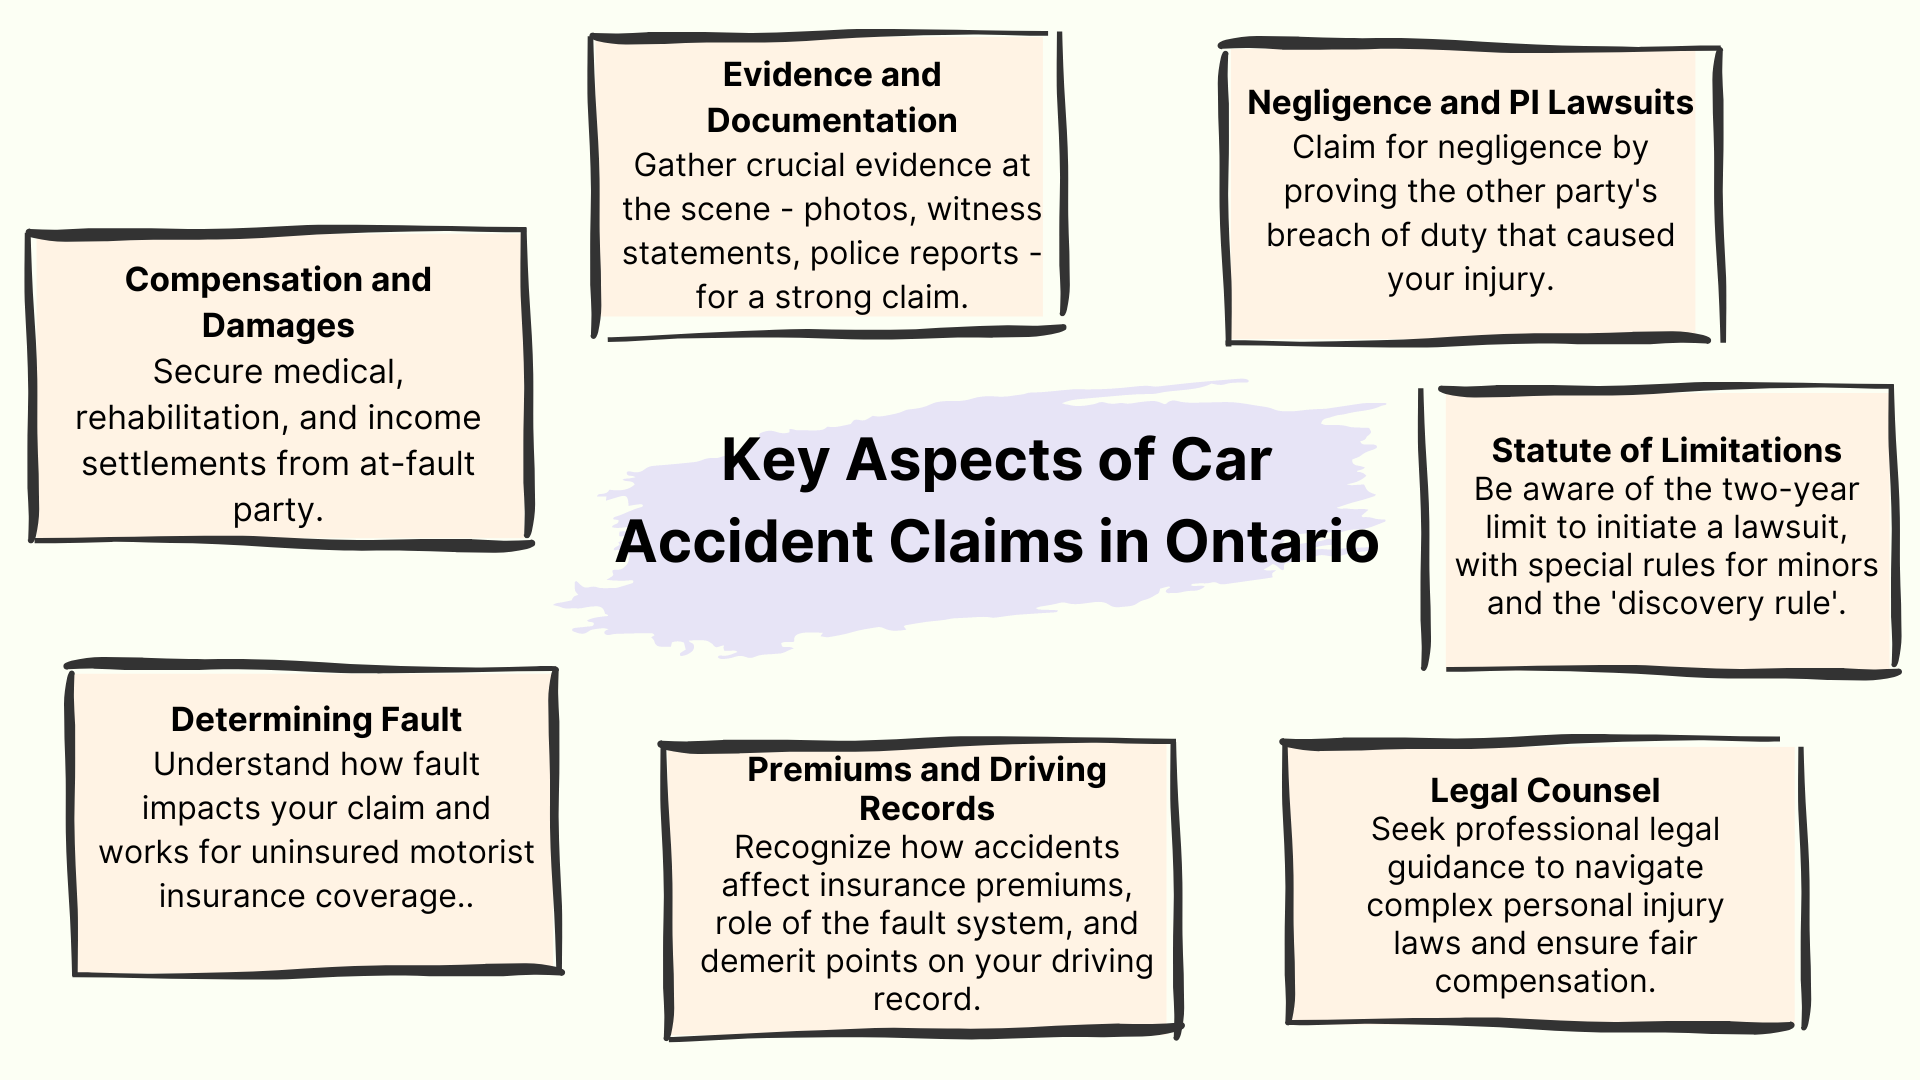 Can You Sue for a Car Accident in Ontario?